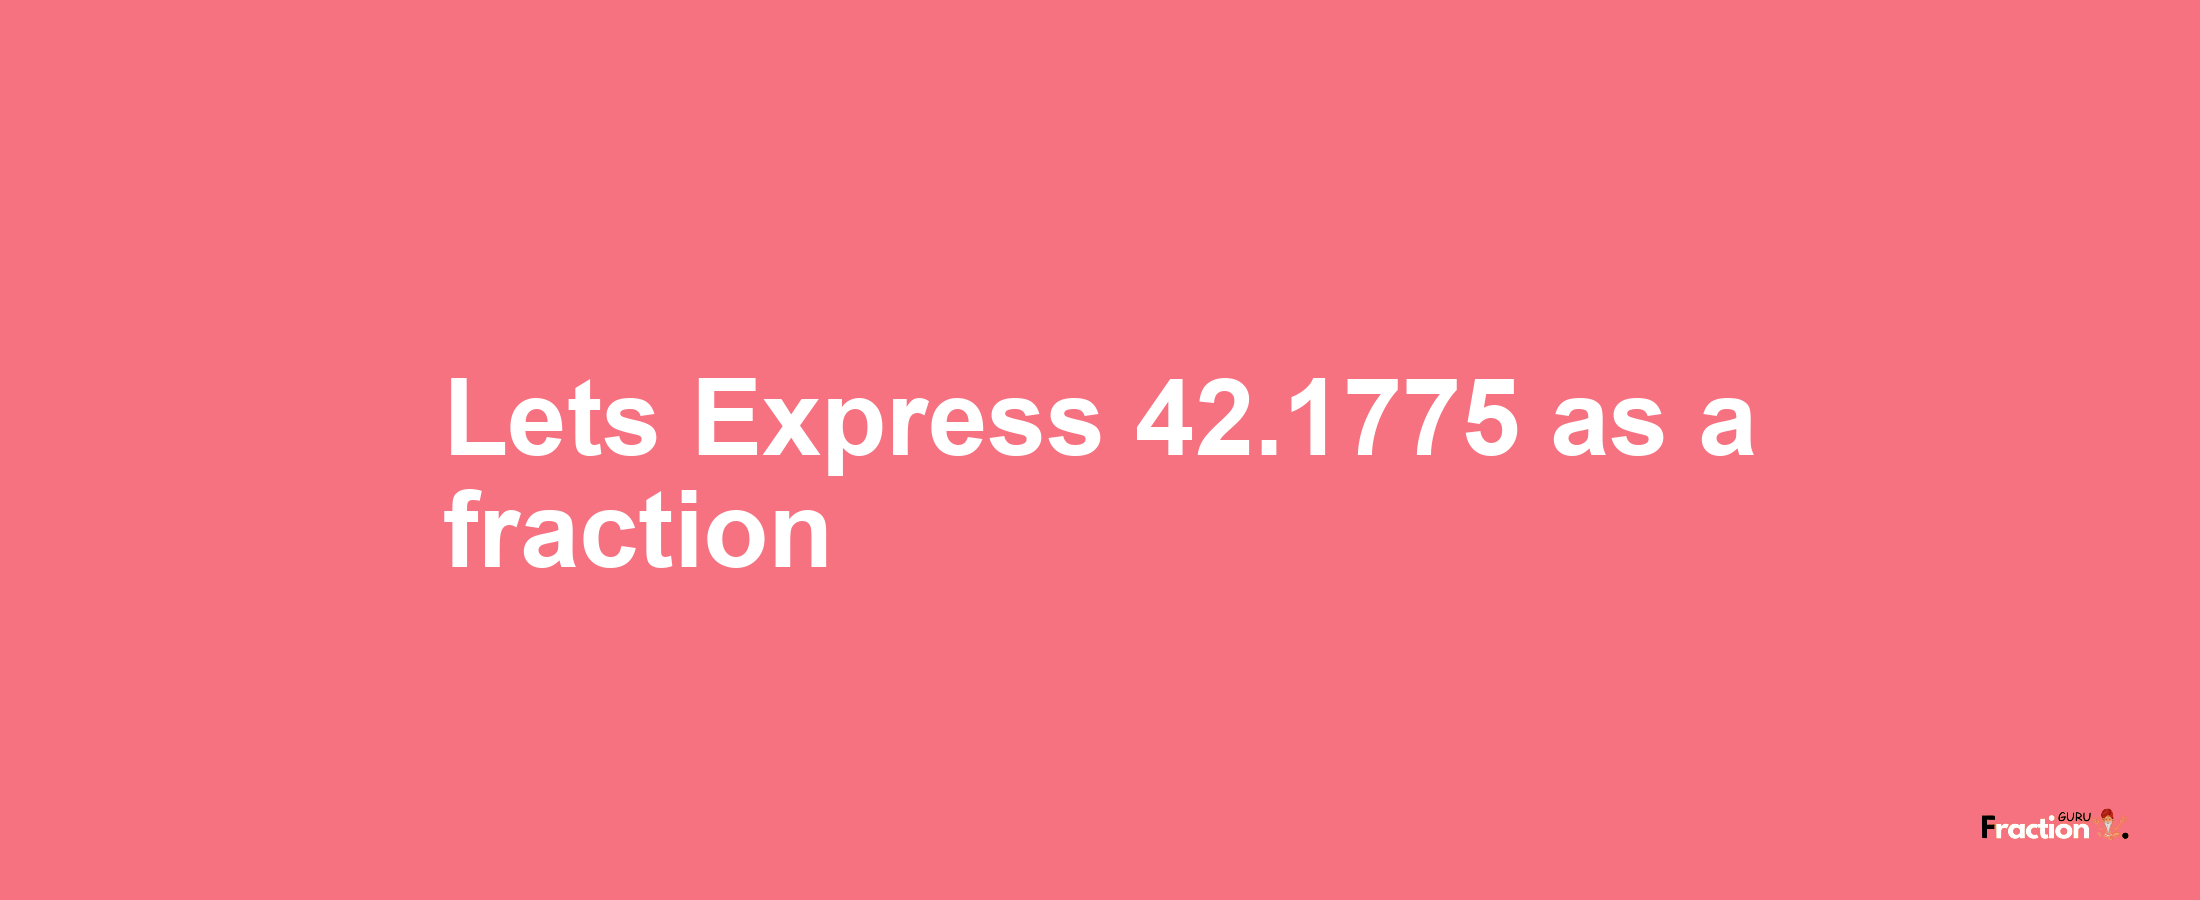 Lets Express 42.1775 as afraction